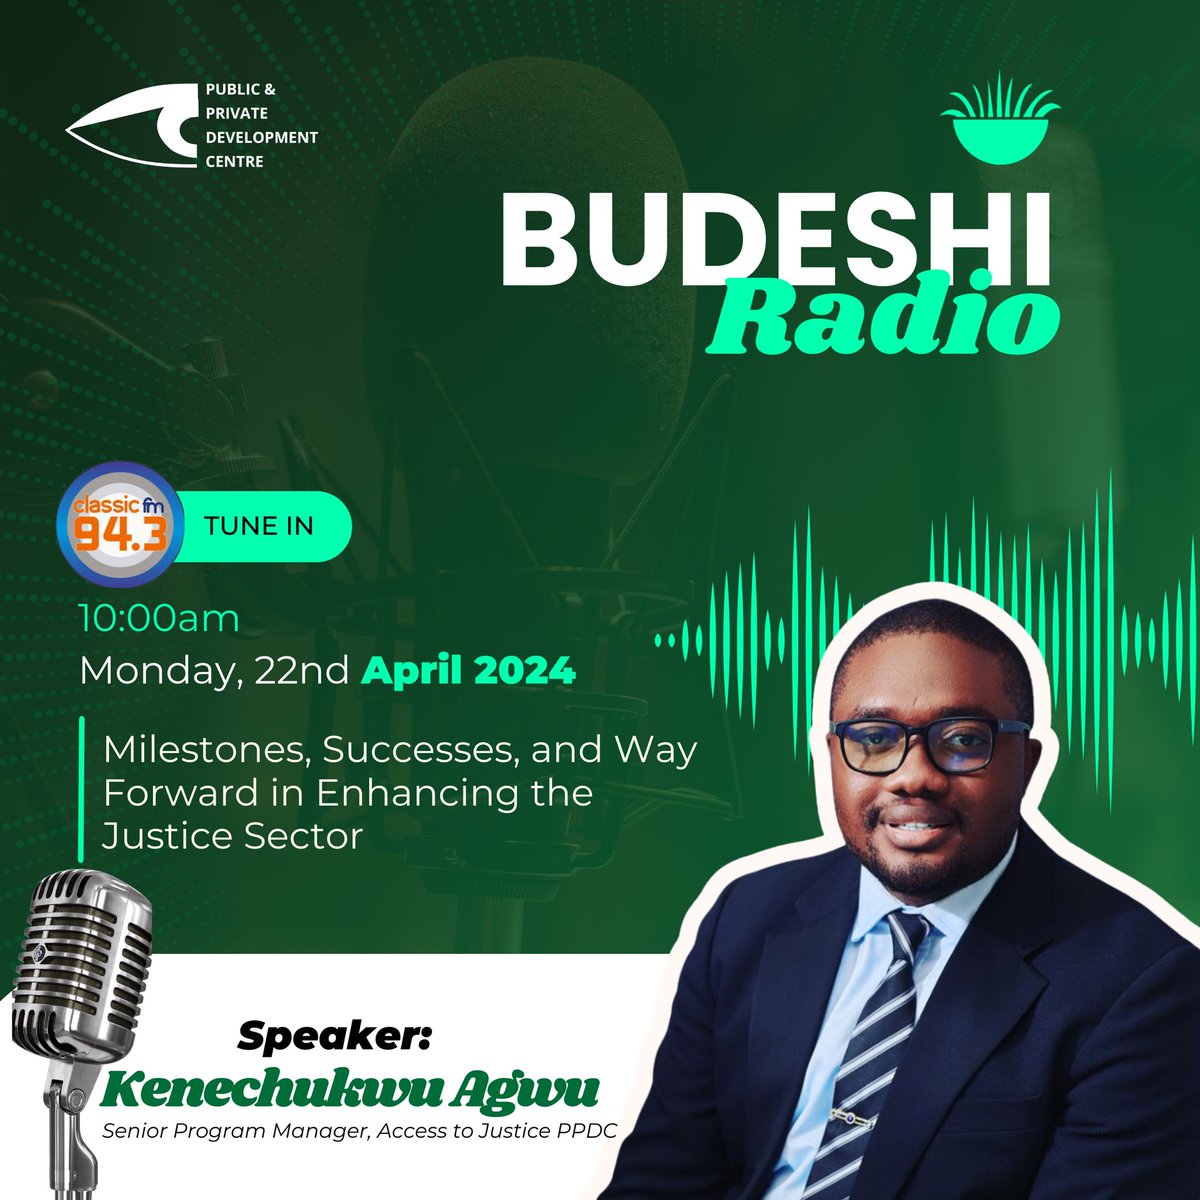 Join us on Monday 22nd April 2024 at 10:00am on @ClassicFM943 as we shed light on milestones, successes and way forward in enhancing the justice sector with @KeneAgwu Do not miss the show as we look forward to engaging with you on the phone lines. #radio #budeshiradio #ppdc